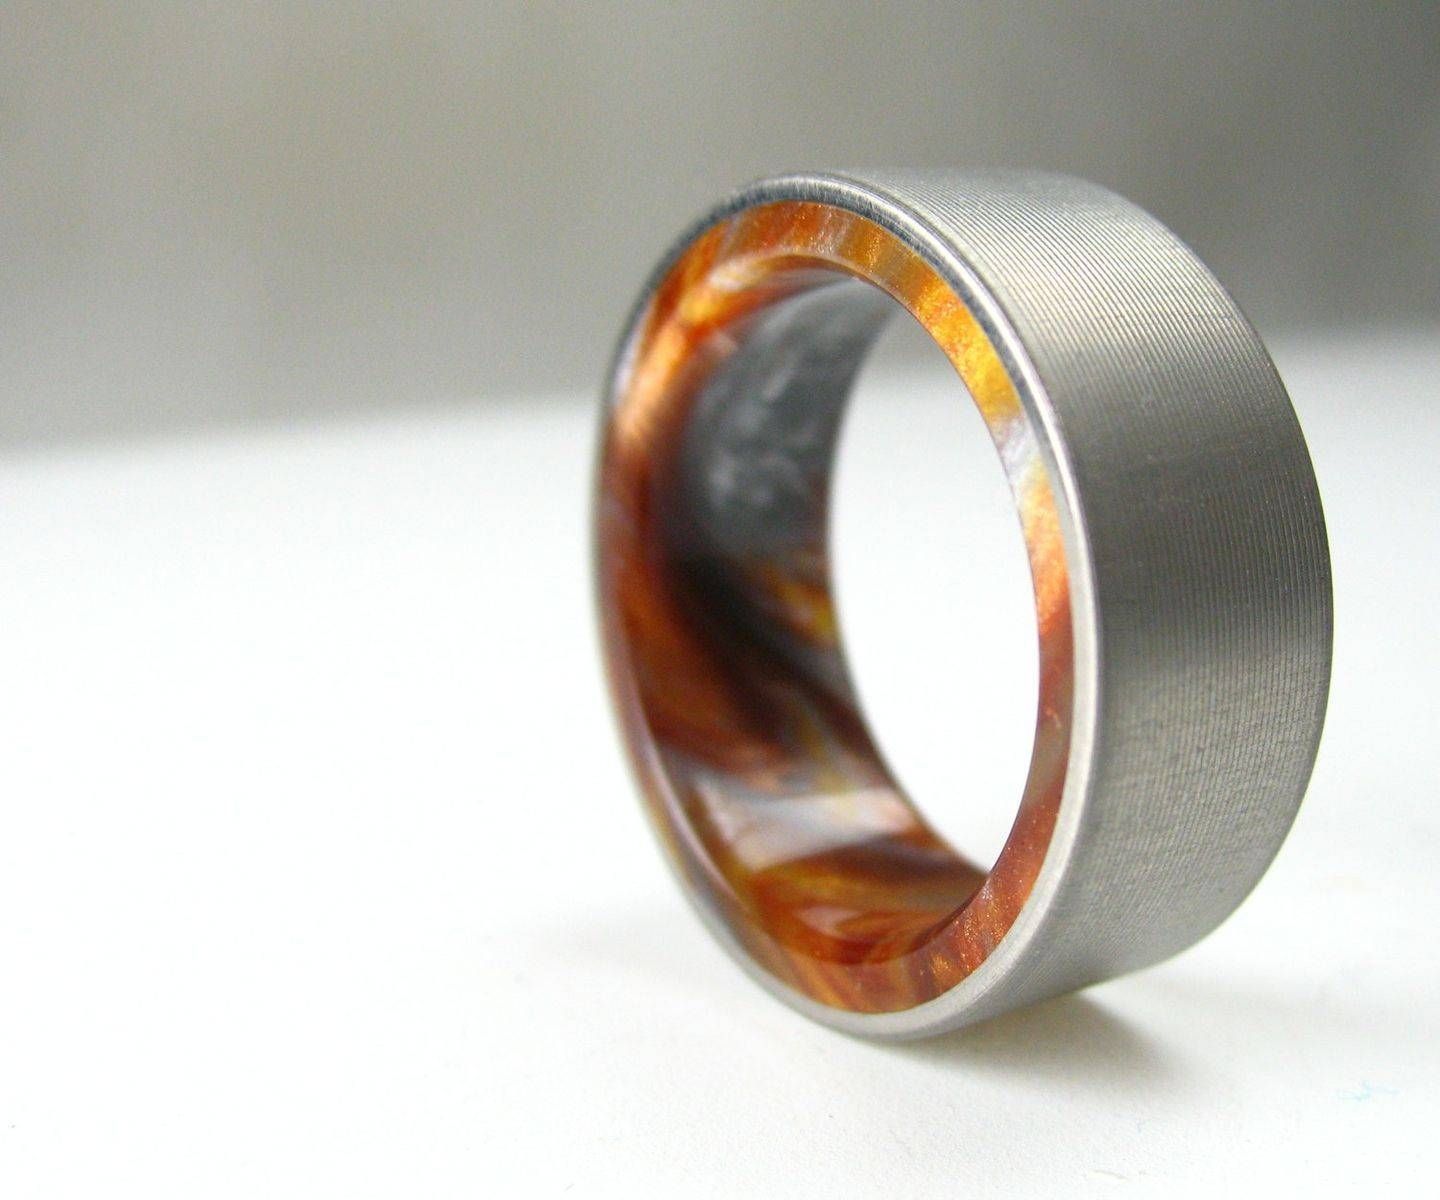 Modern Wedding Bands | Contemporary Wedding Rings | Custommade With Contemporary Mens Wedding Rings (View 1 of 15)